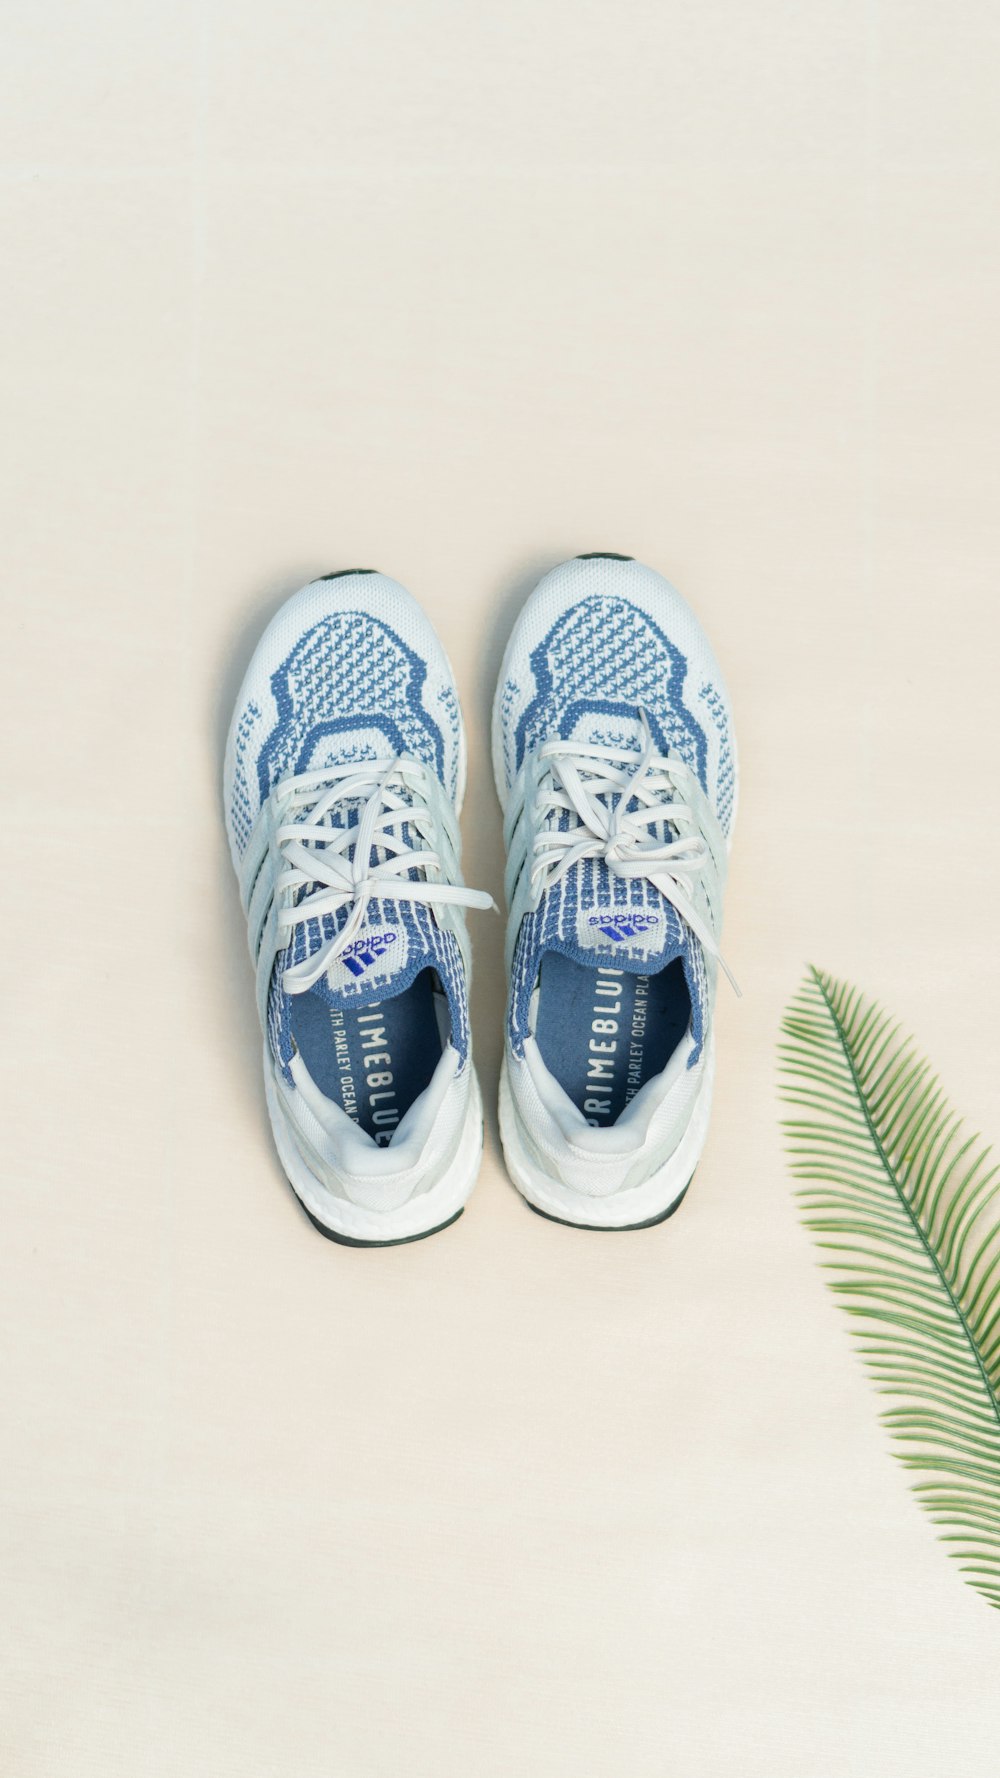 a pair of blue and white sneakers next to a plant